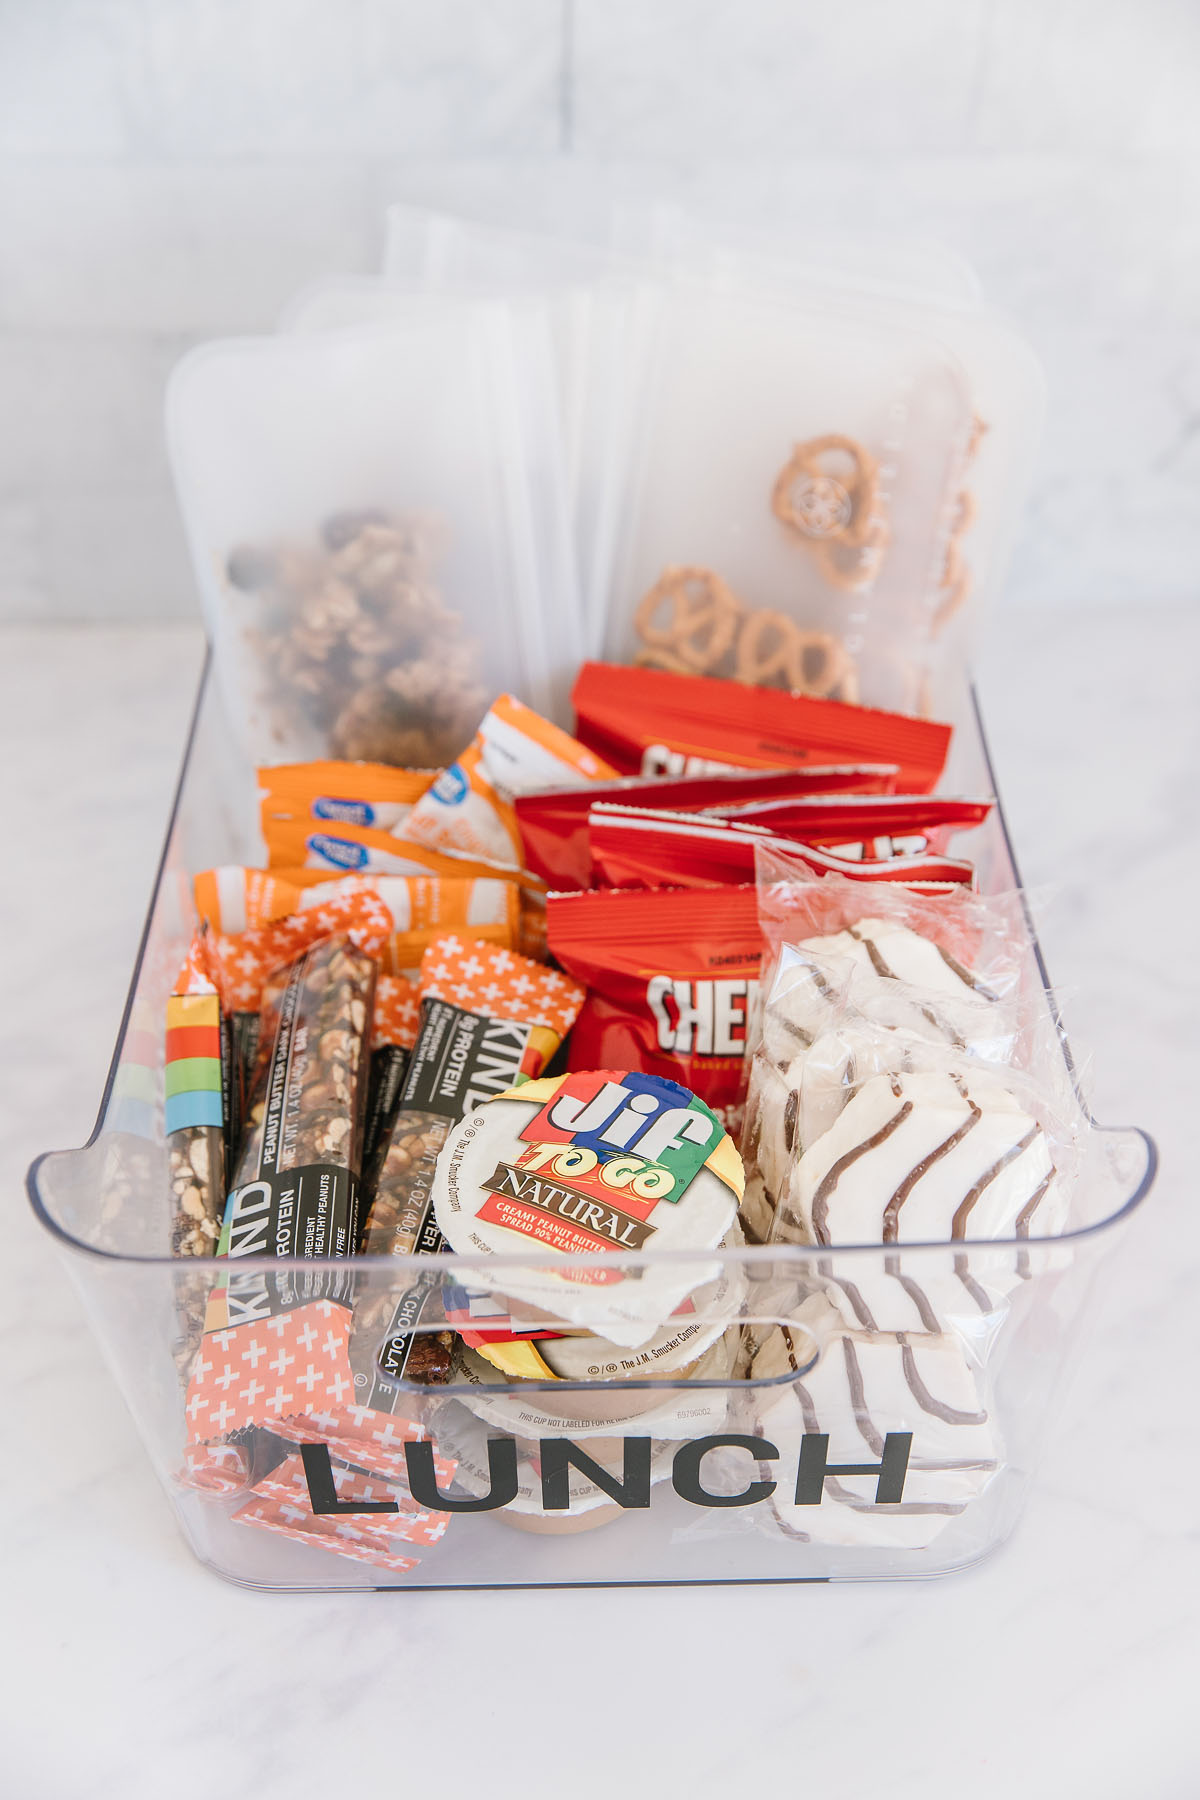 A plastic container with the word lunch on it filled with packaged snacks, nuts, peanut butter, crackers and pretzels. Perfect school lunch ideas!